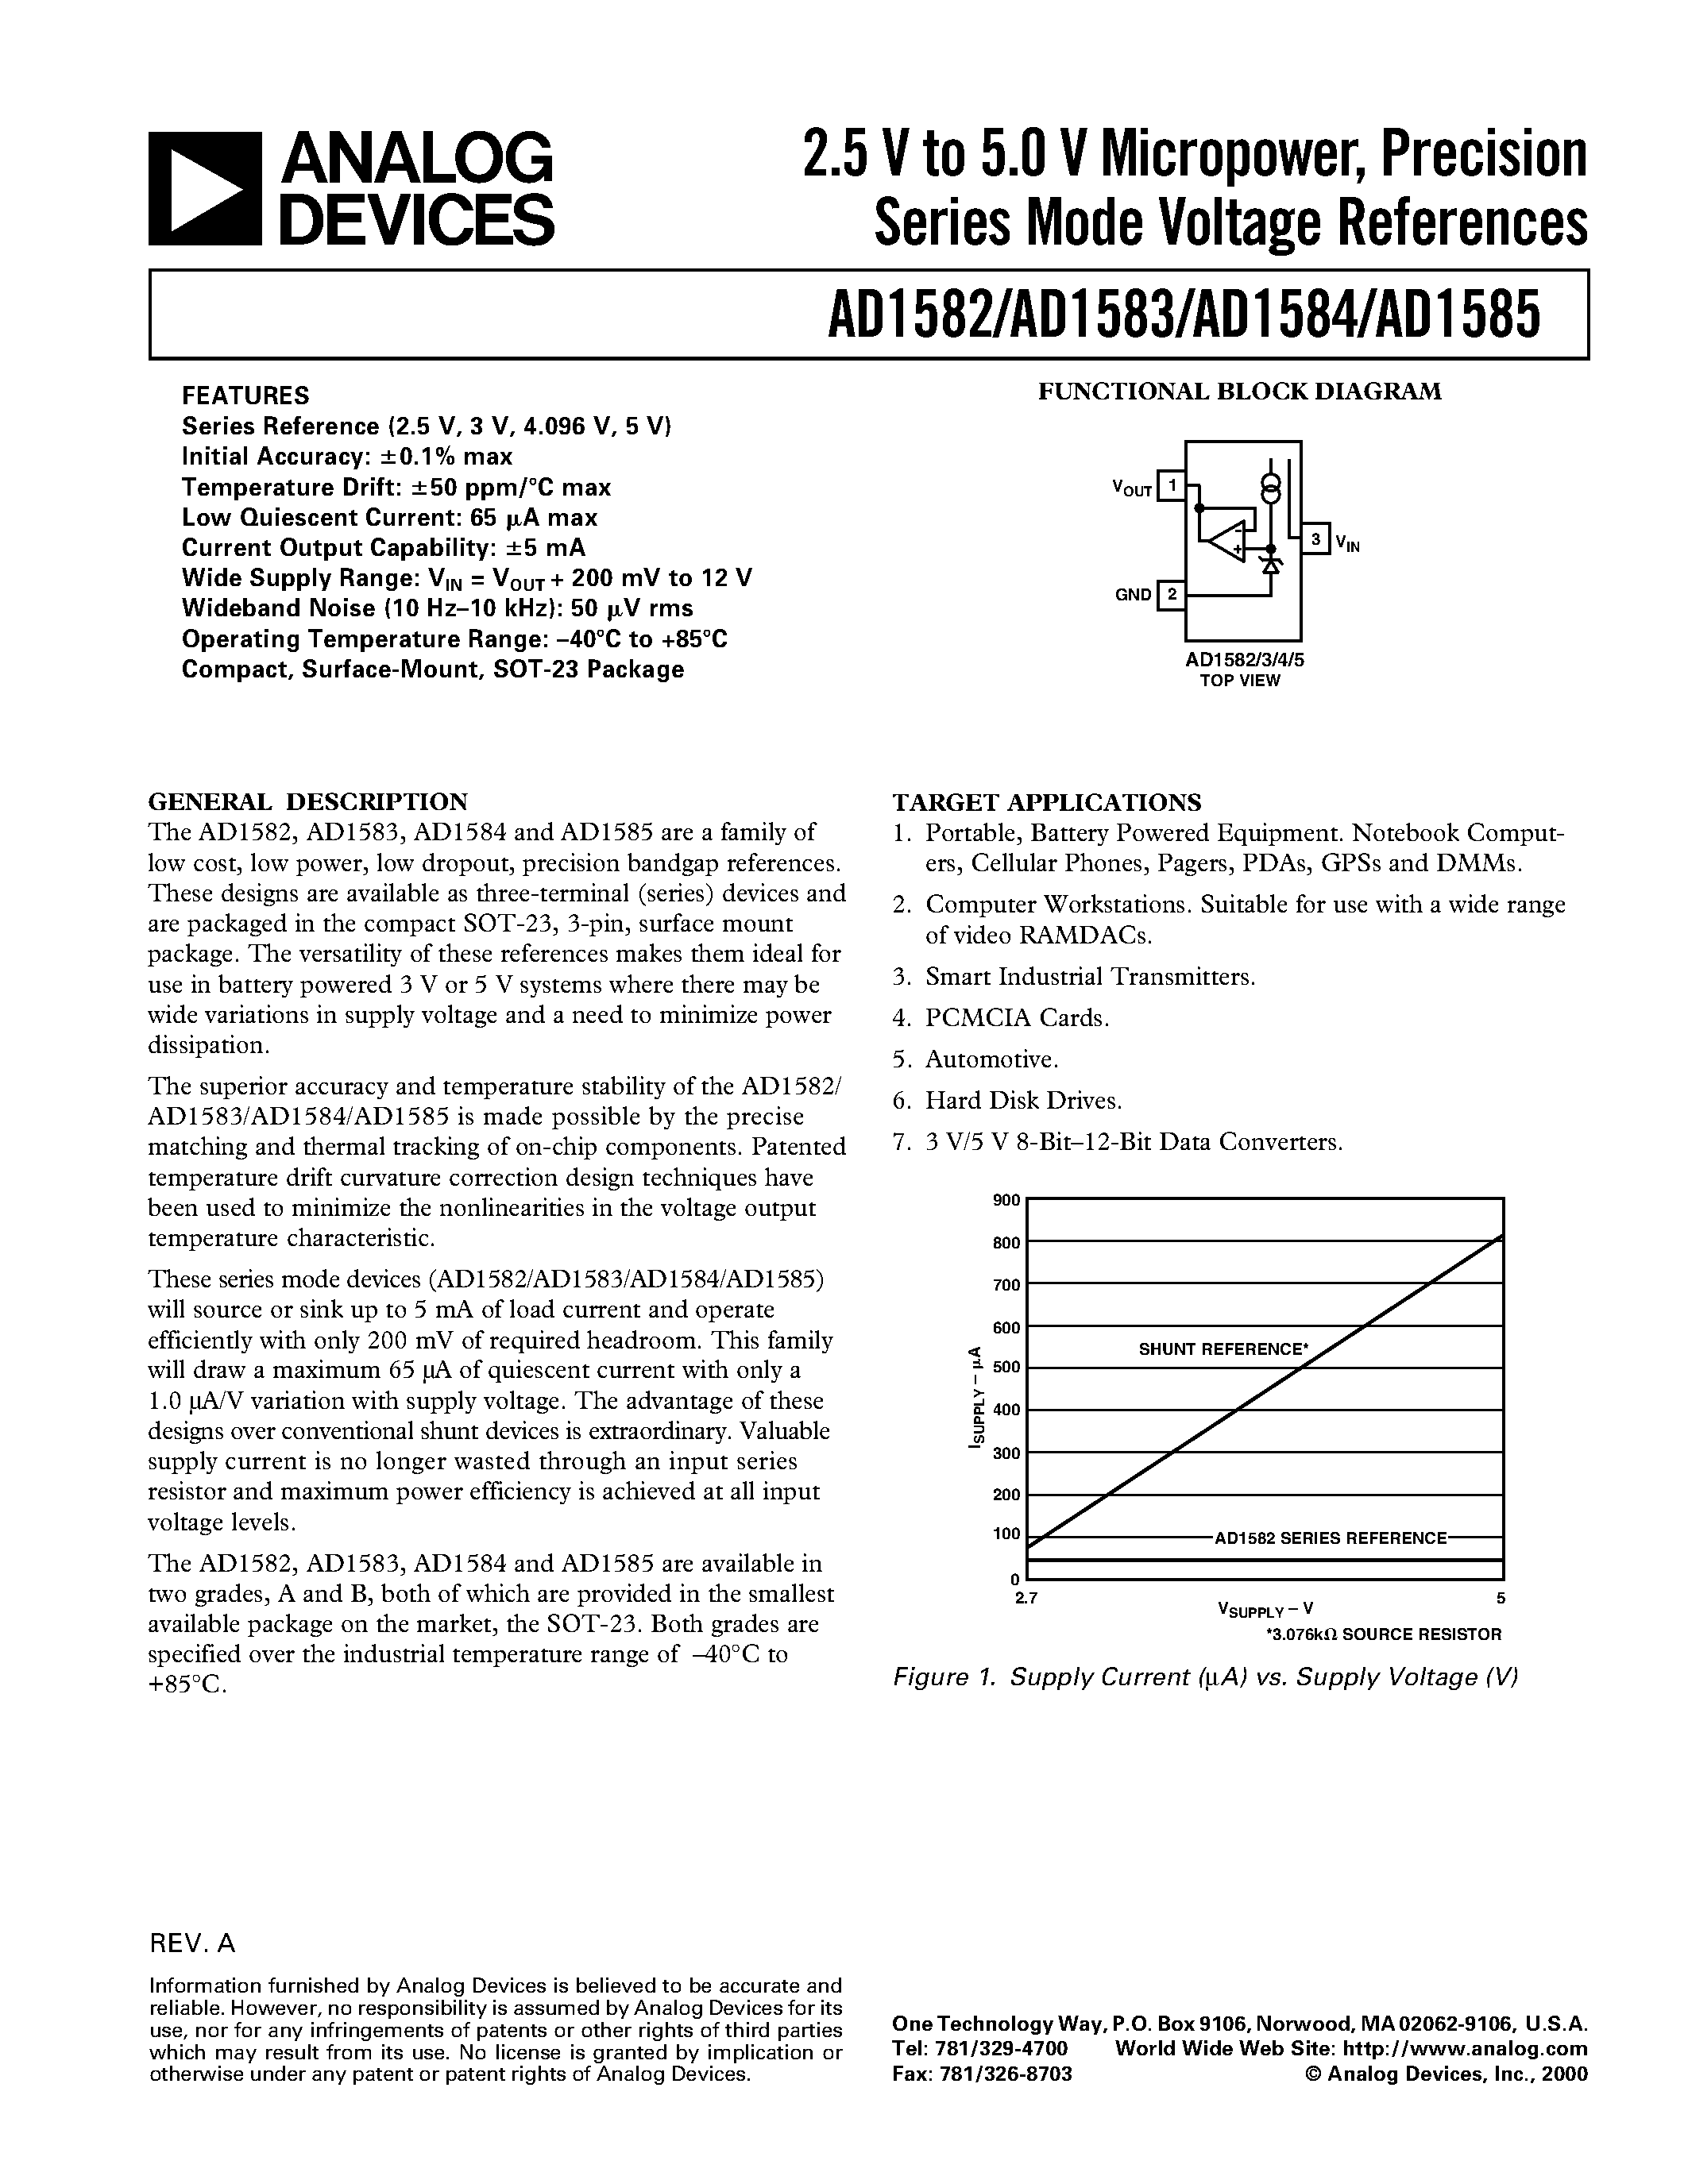 Datasheet AD1583B - 2.5 V to 5.0 V Micropower/ Precision Series Mode Voltage References page 1